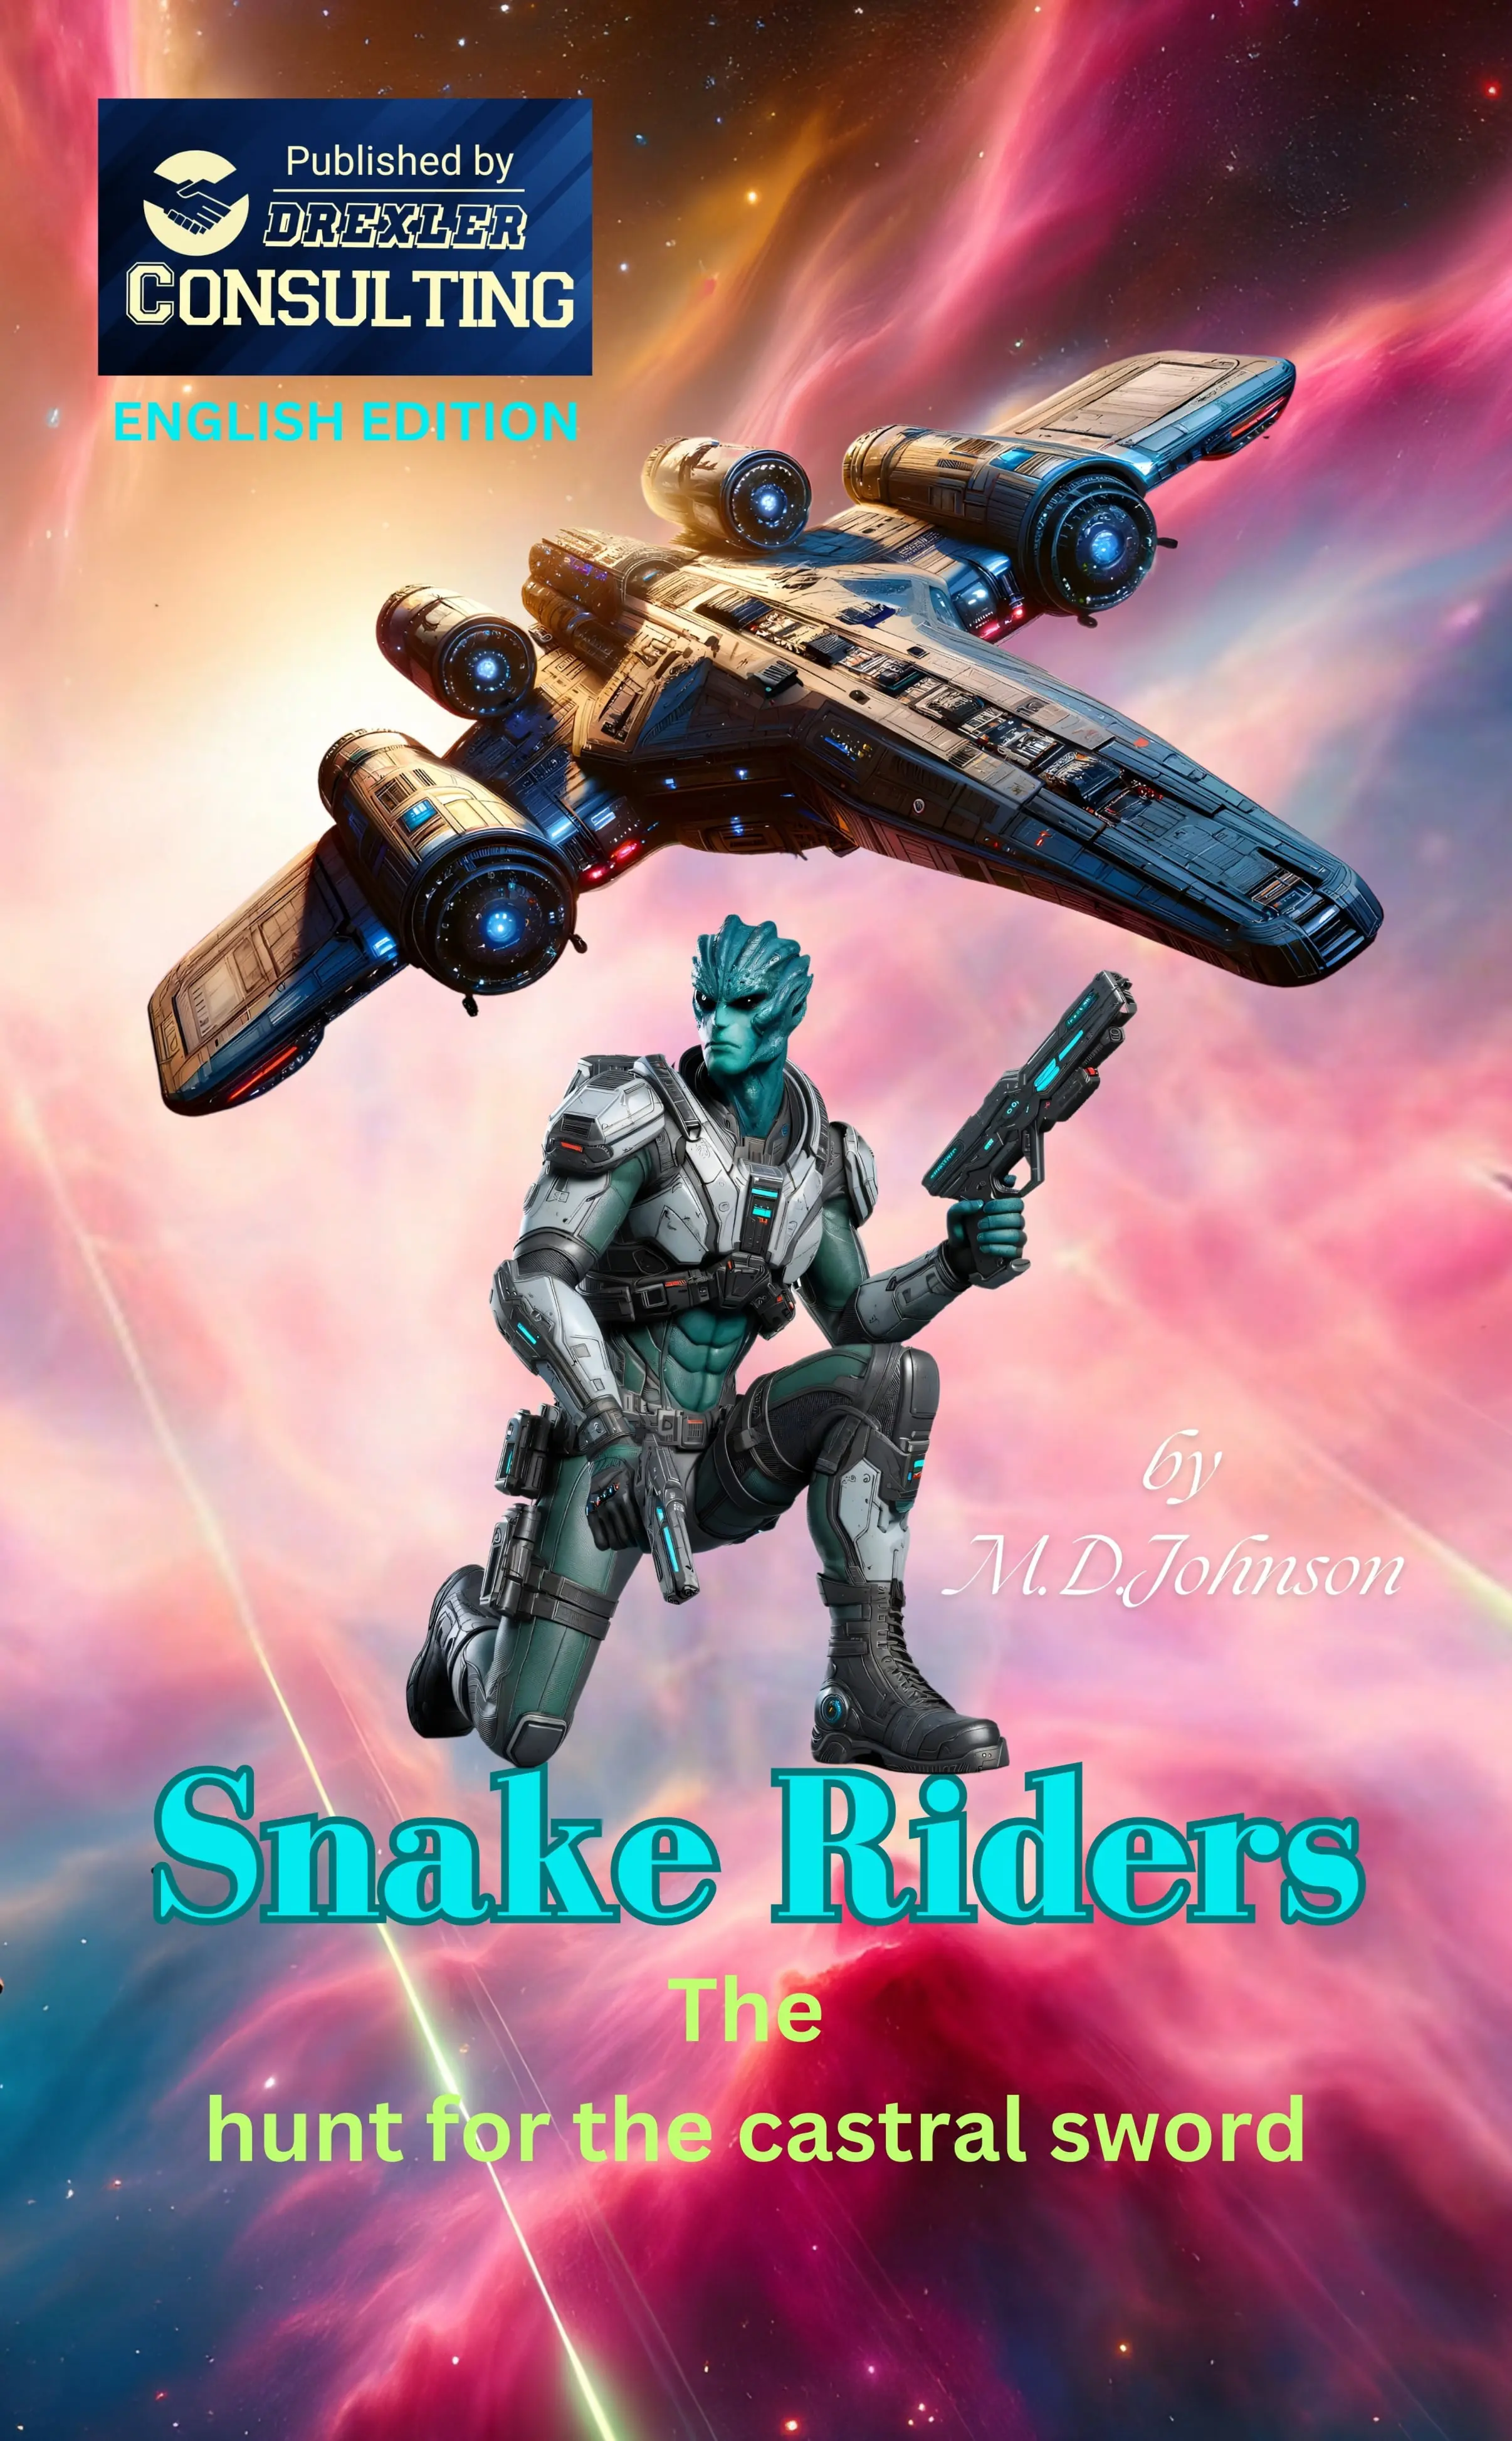 snake riders drexler consulting publishing science fiction book in german and english